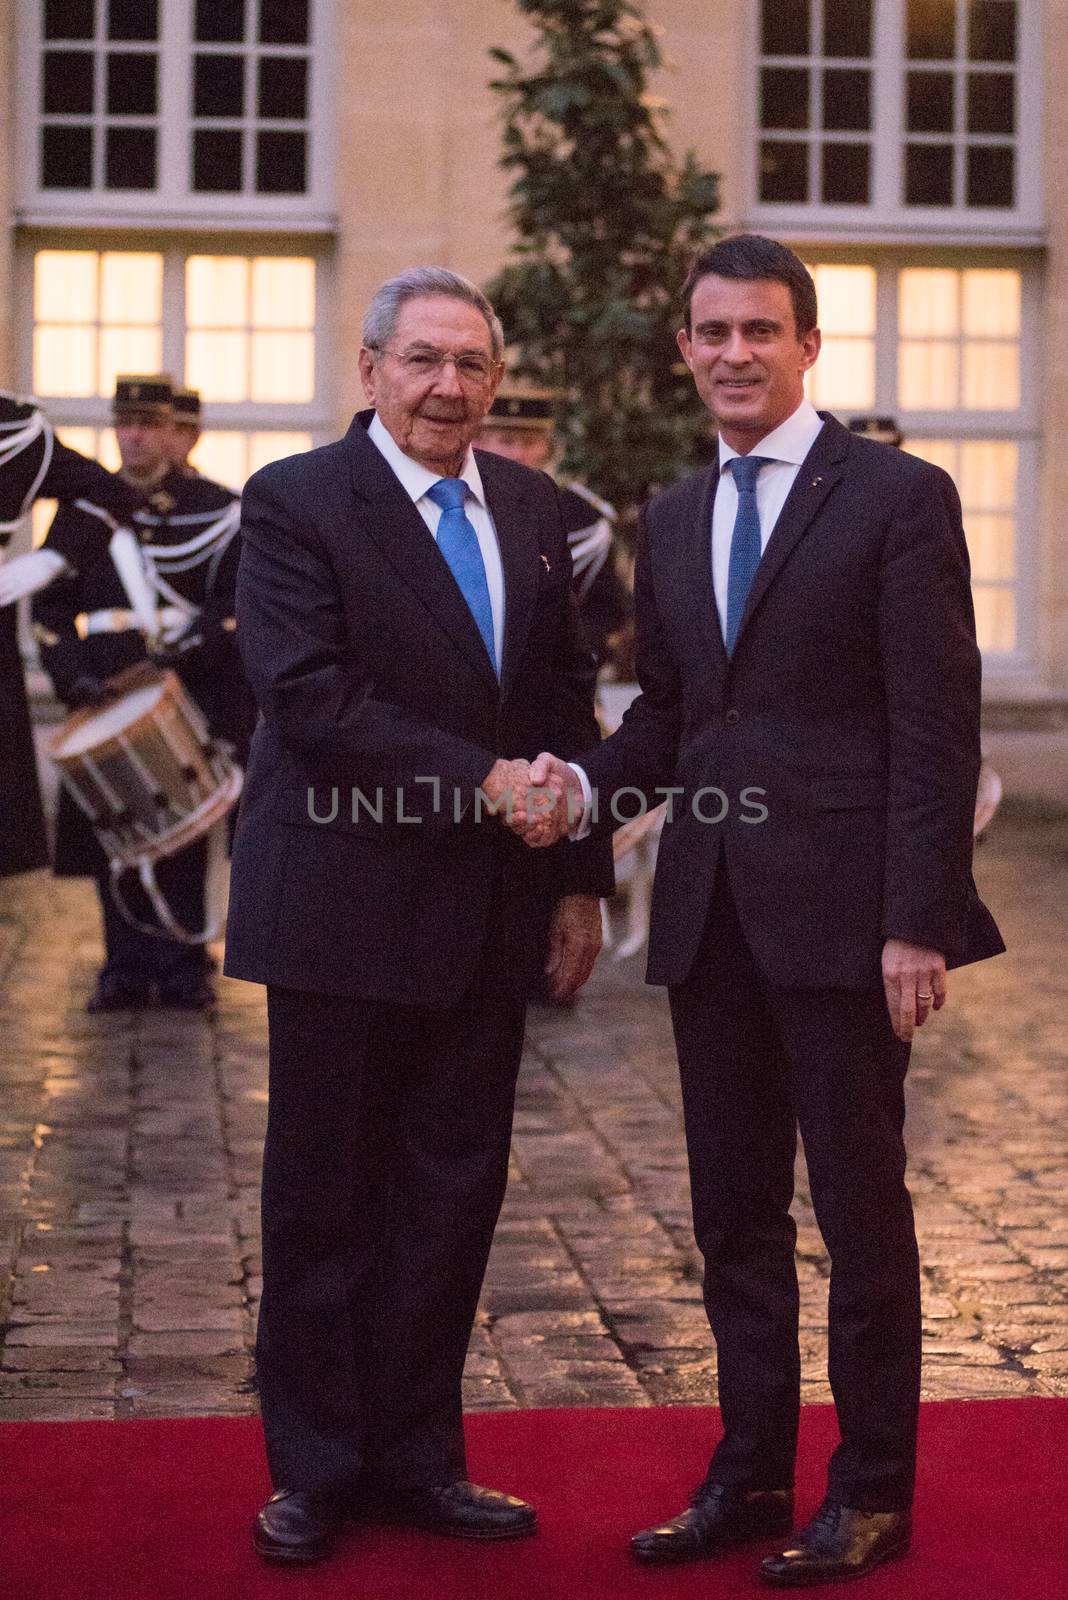 FRANCE, Paris : French Prime Minister Manuel Valls (R) shakes hands with Cuban President Raul Castro at the Hotel Matignon in Paris on February 2, 2016.